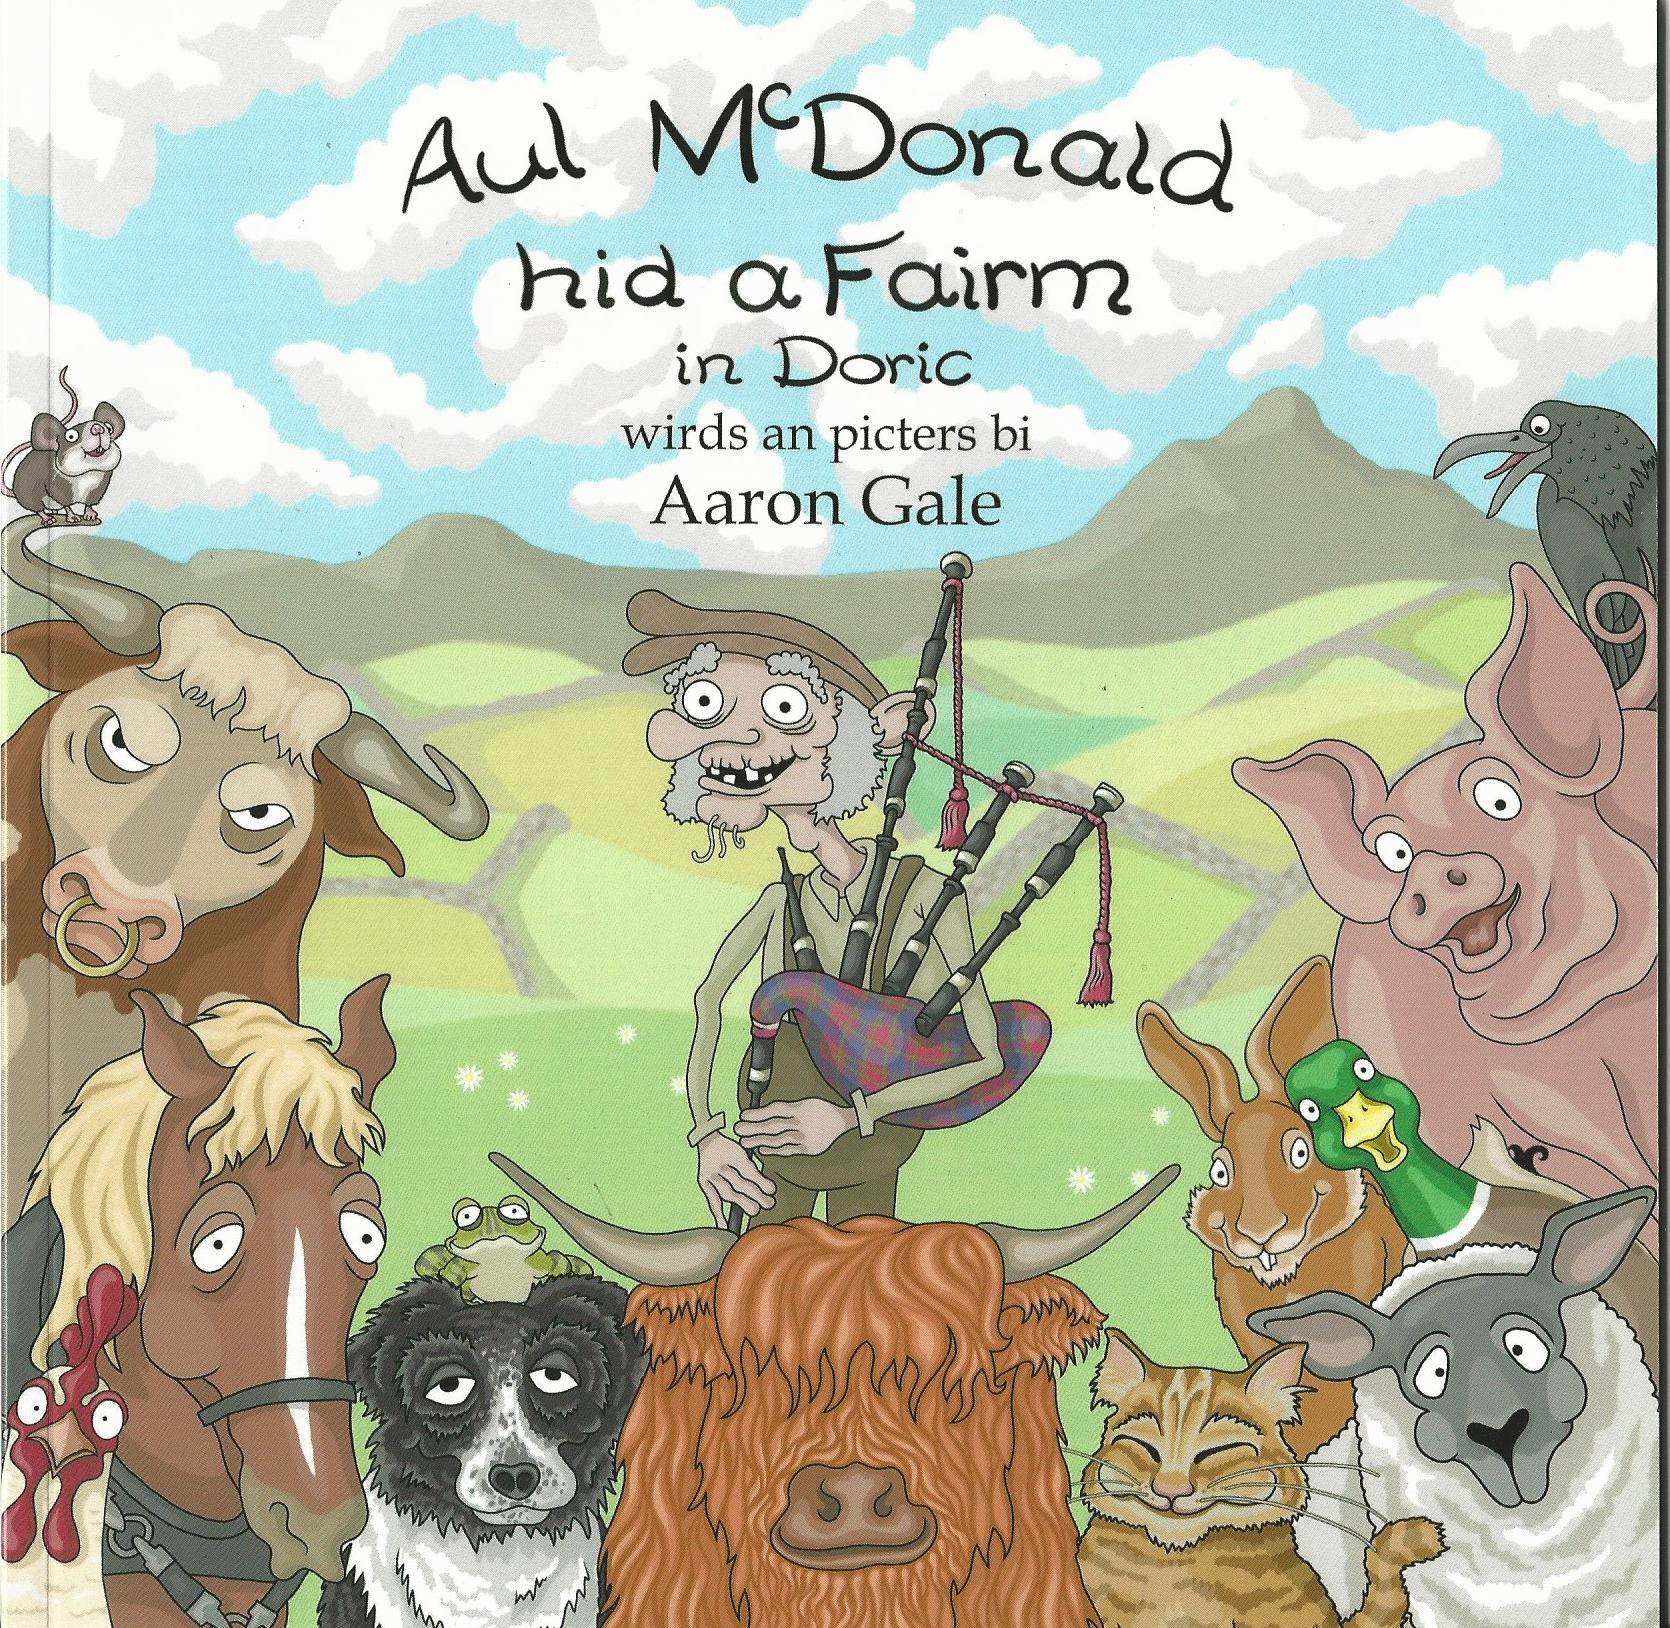 Image for Aul McDonald hid a Fairm in Doric.